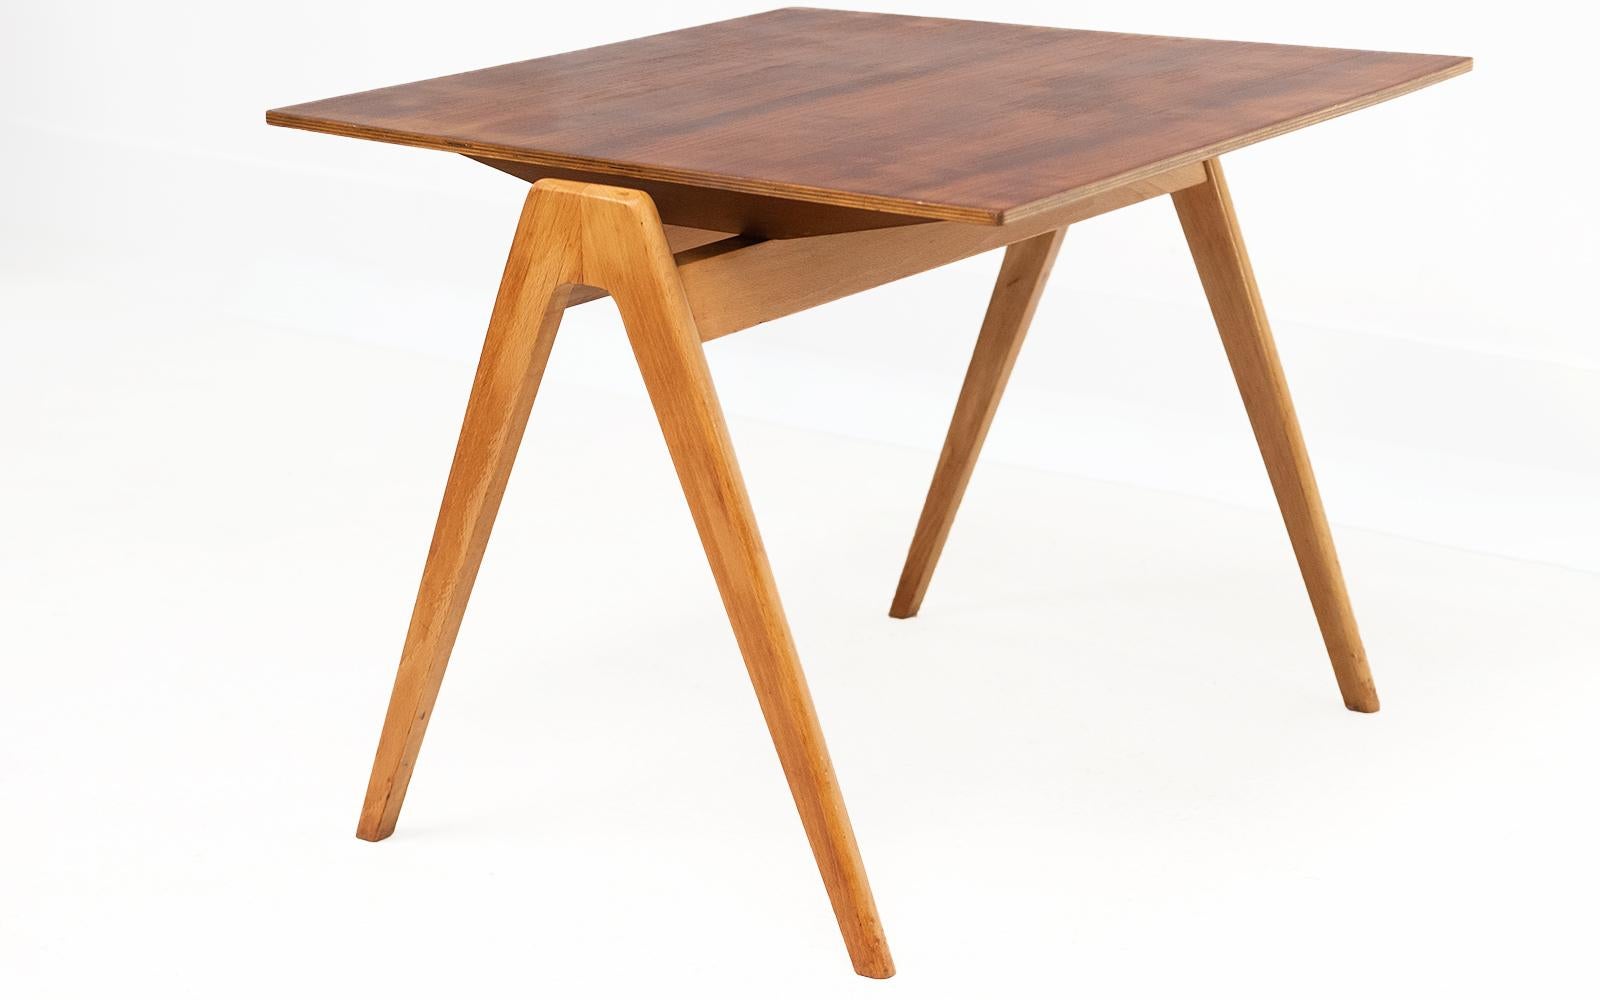 Hillestak coffee table

A rare Hillestak coffee table designed by Robin Day for Hille London. It has beech legs with a fruitwood top. 

Robin Day was an iconic British industrial designer, and he rose to prominence in 1951 when he designed